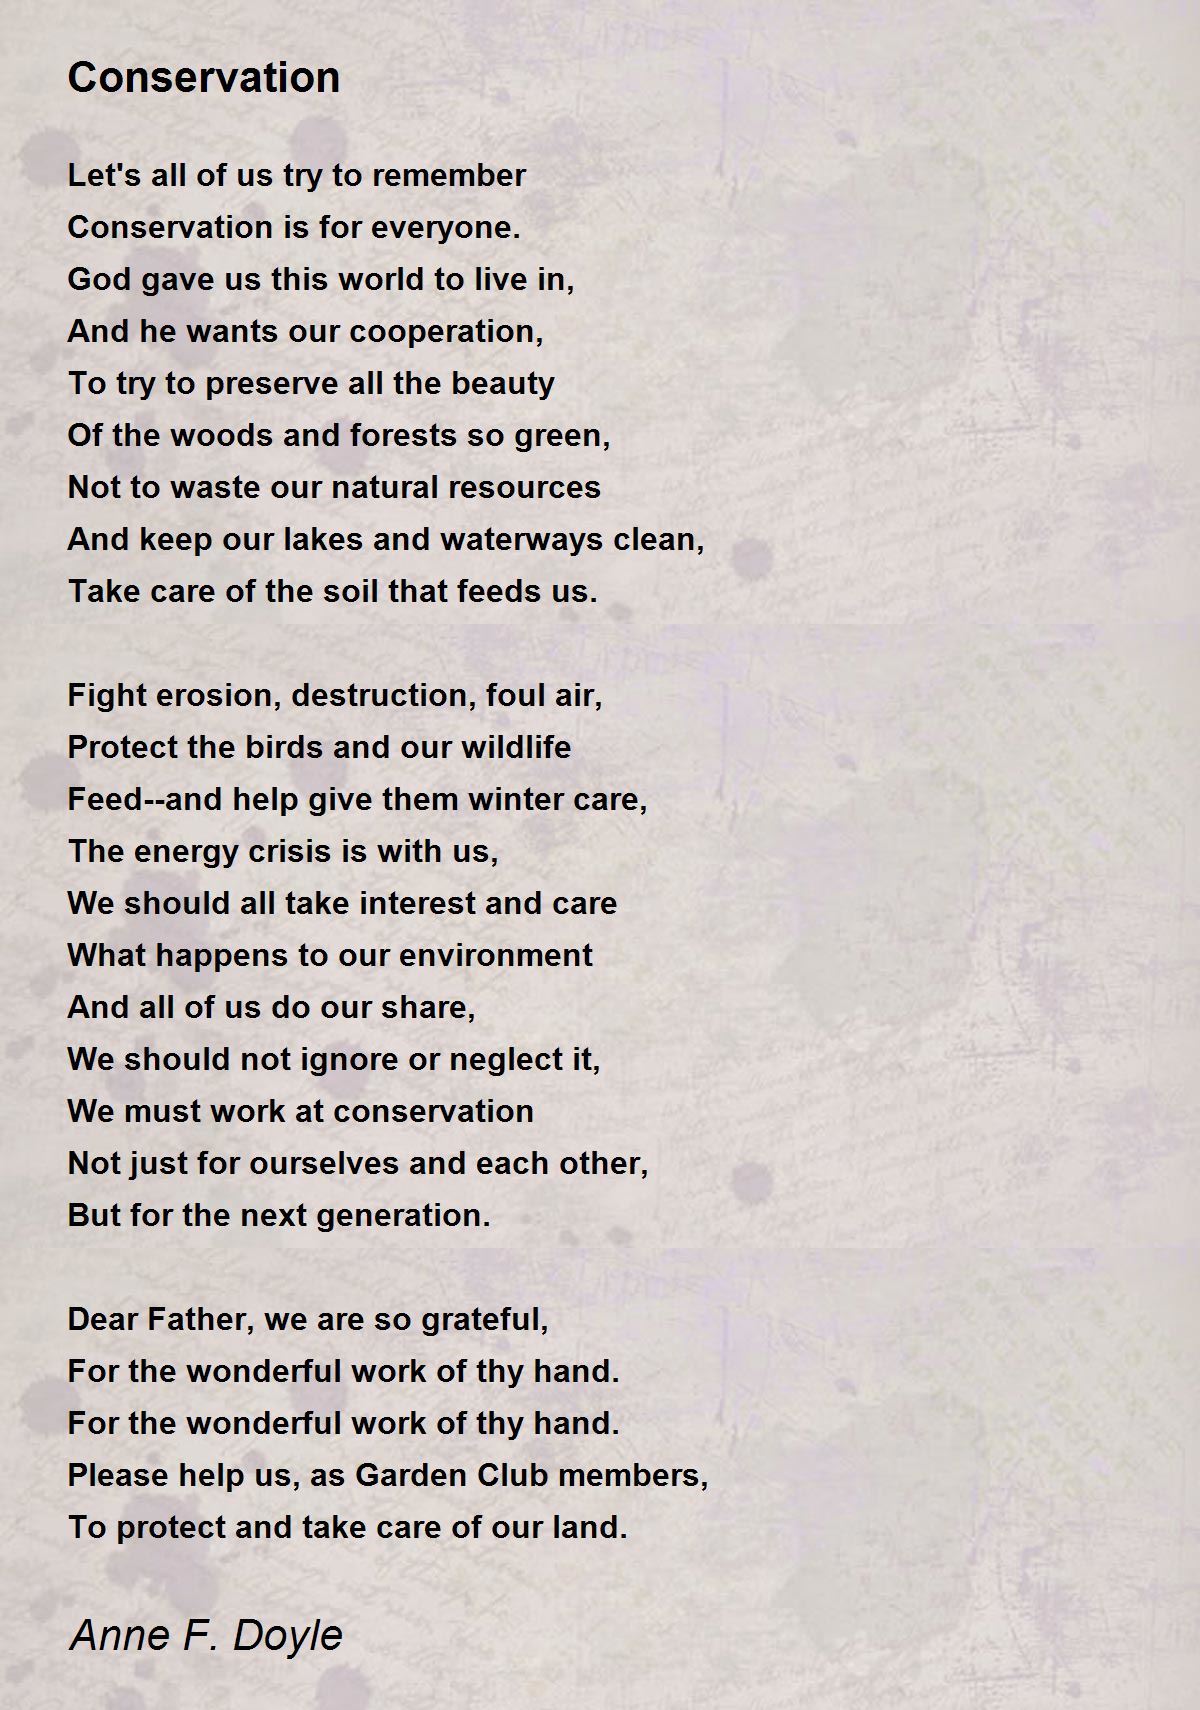 Conservation - Conservation Poem by Anne F. Doyle